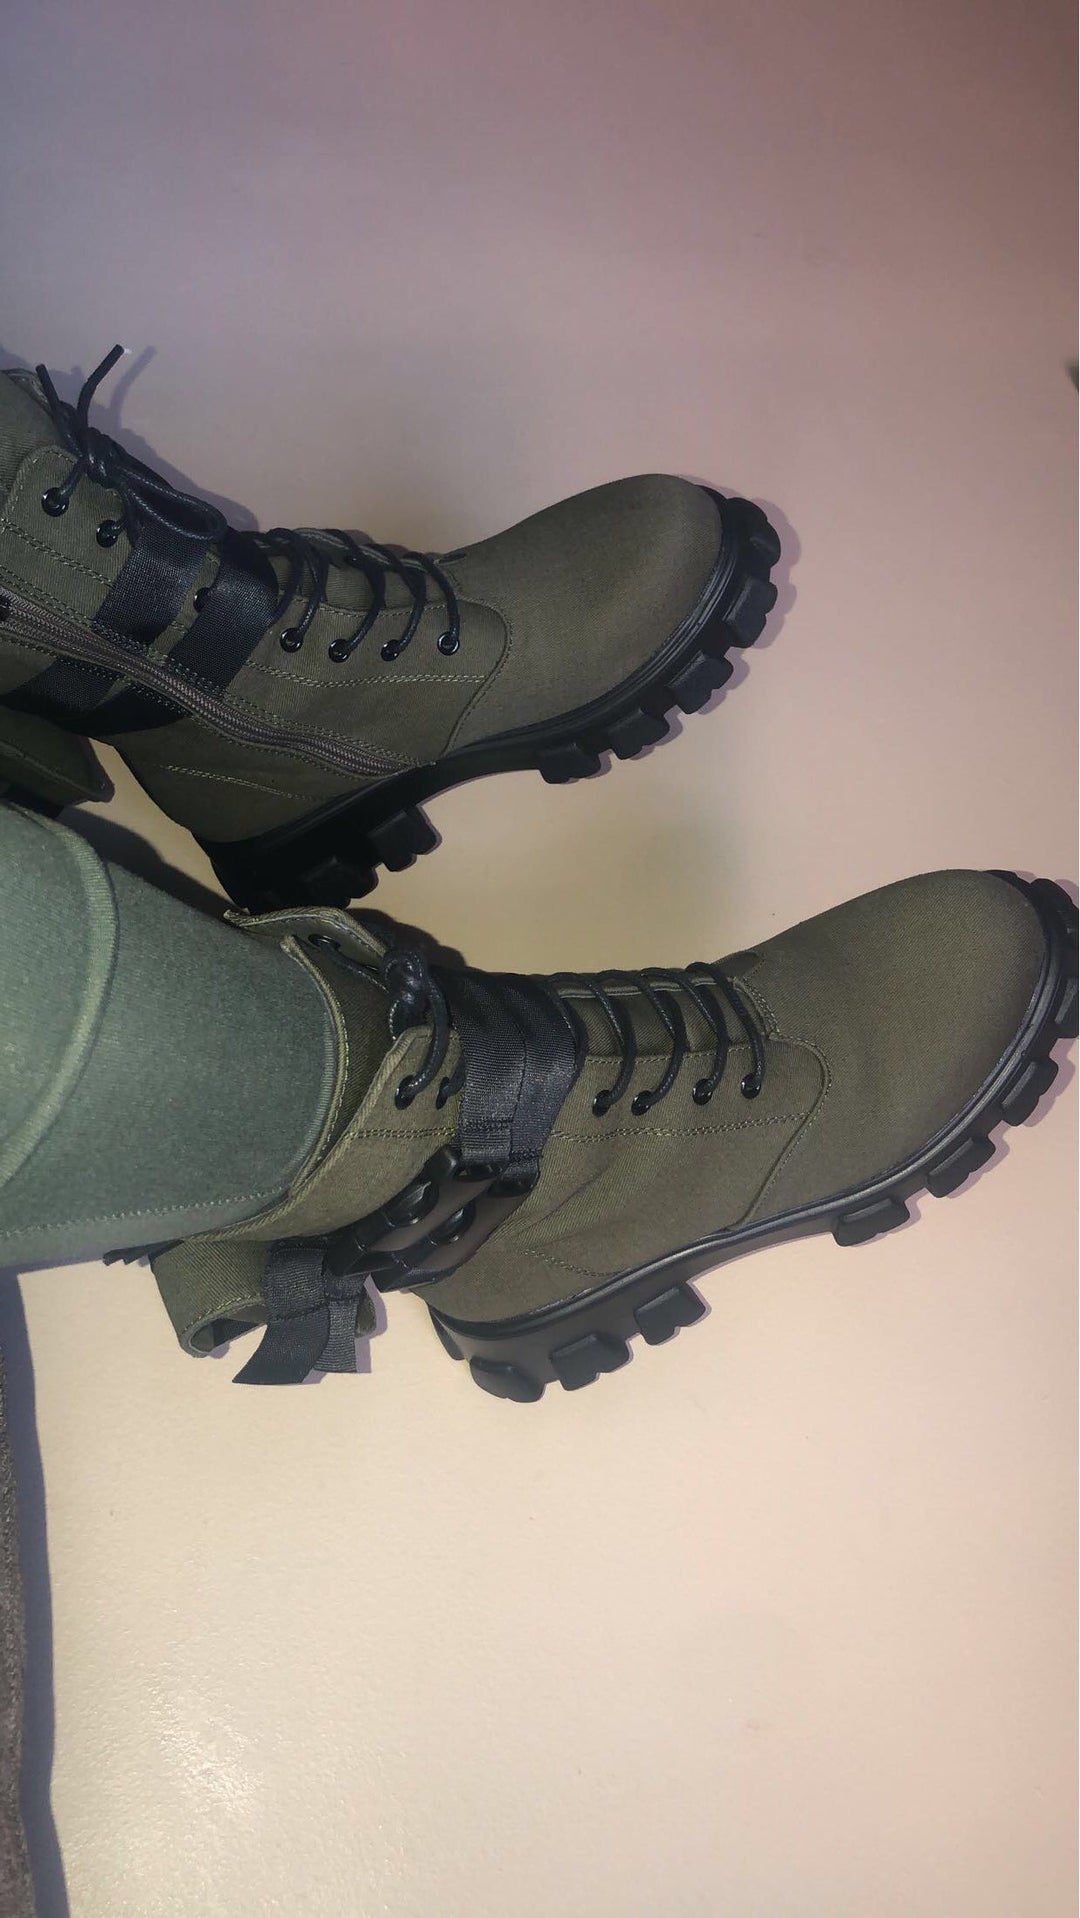 The Remy Military Boots - Rehabcouture